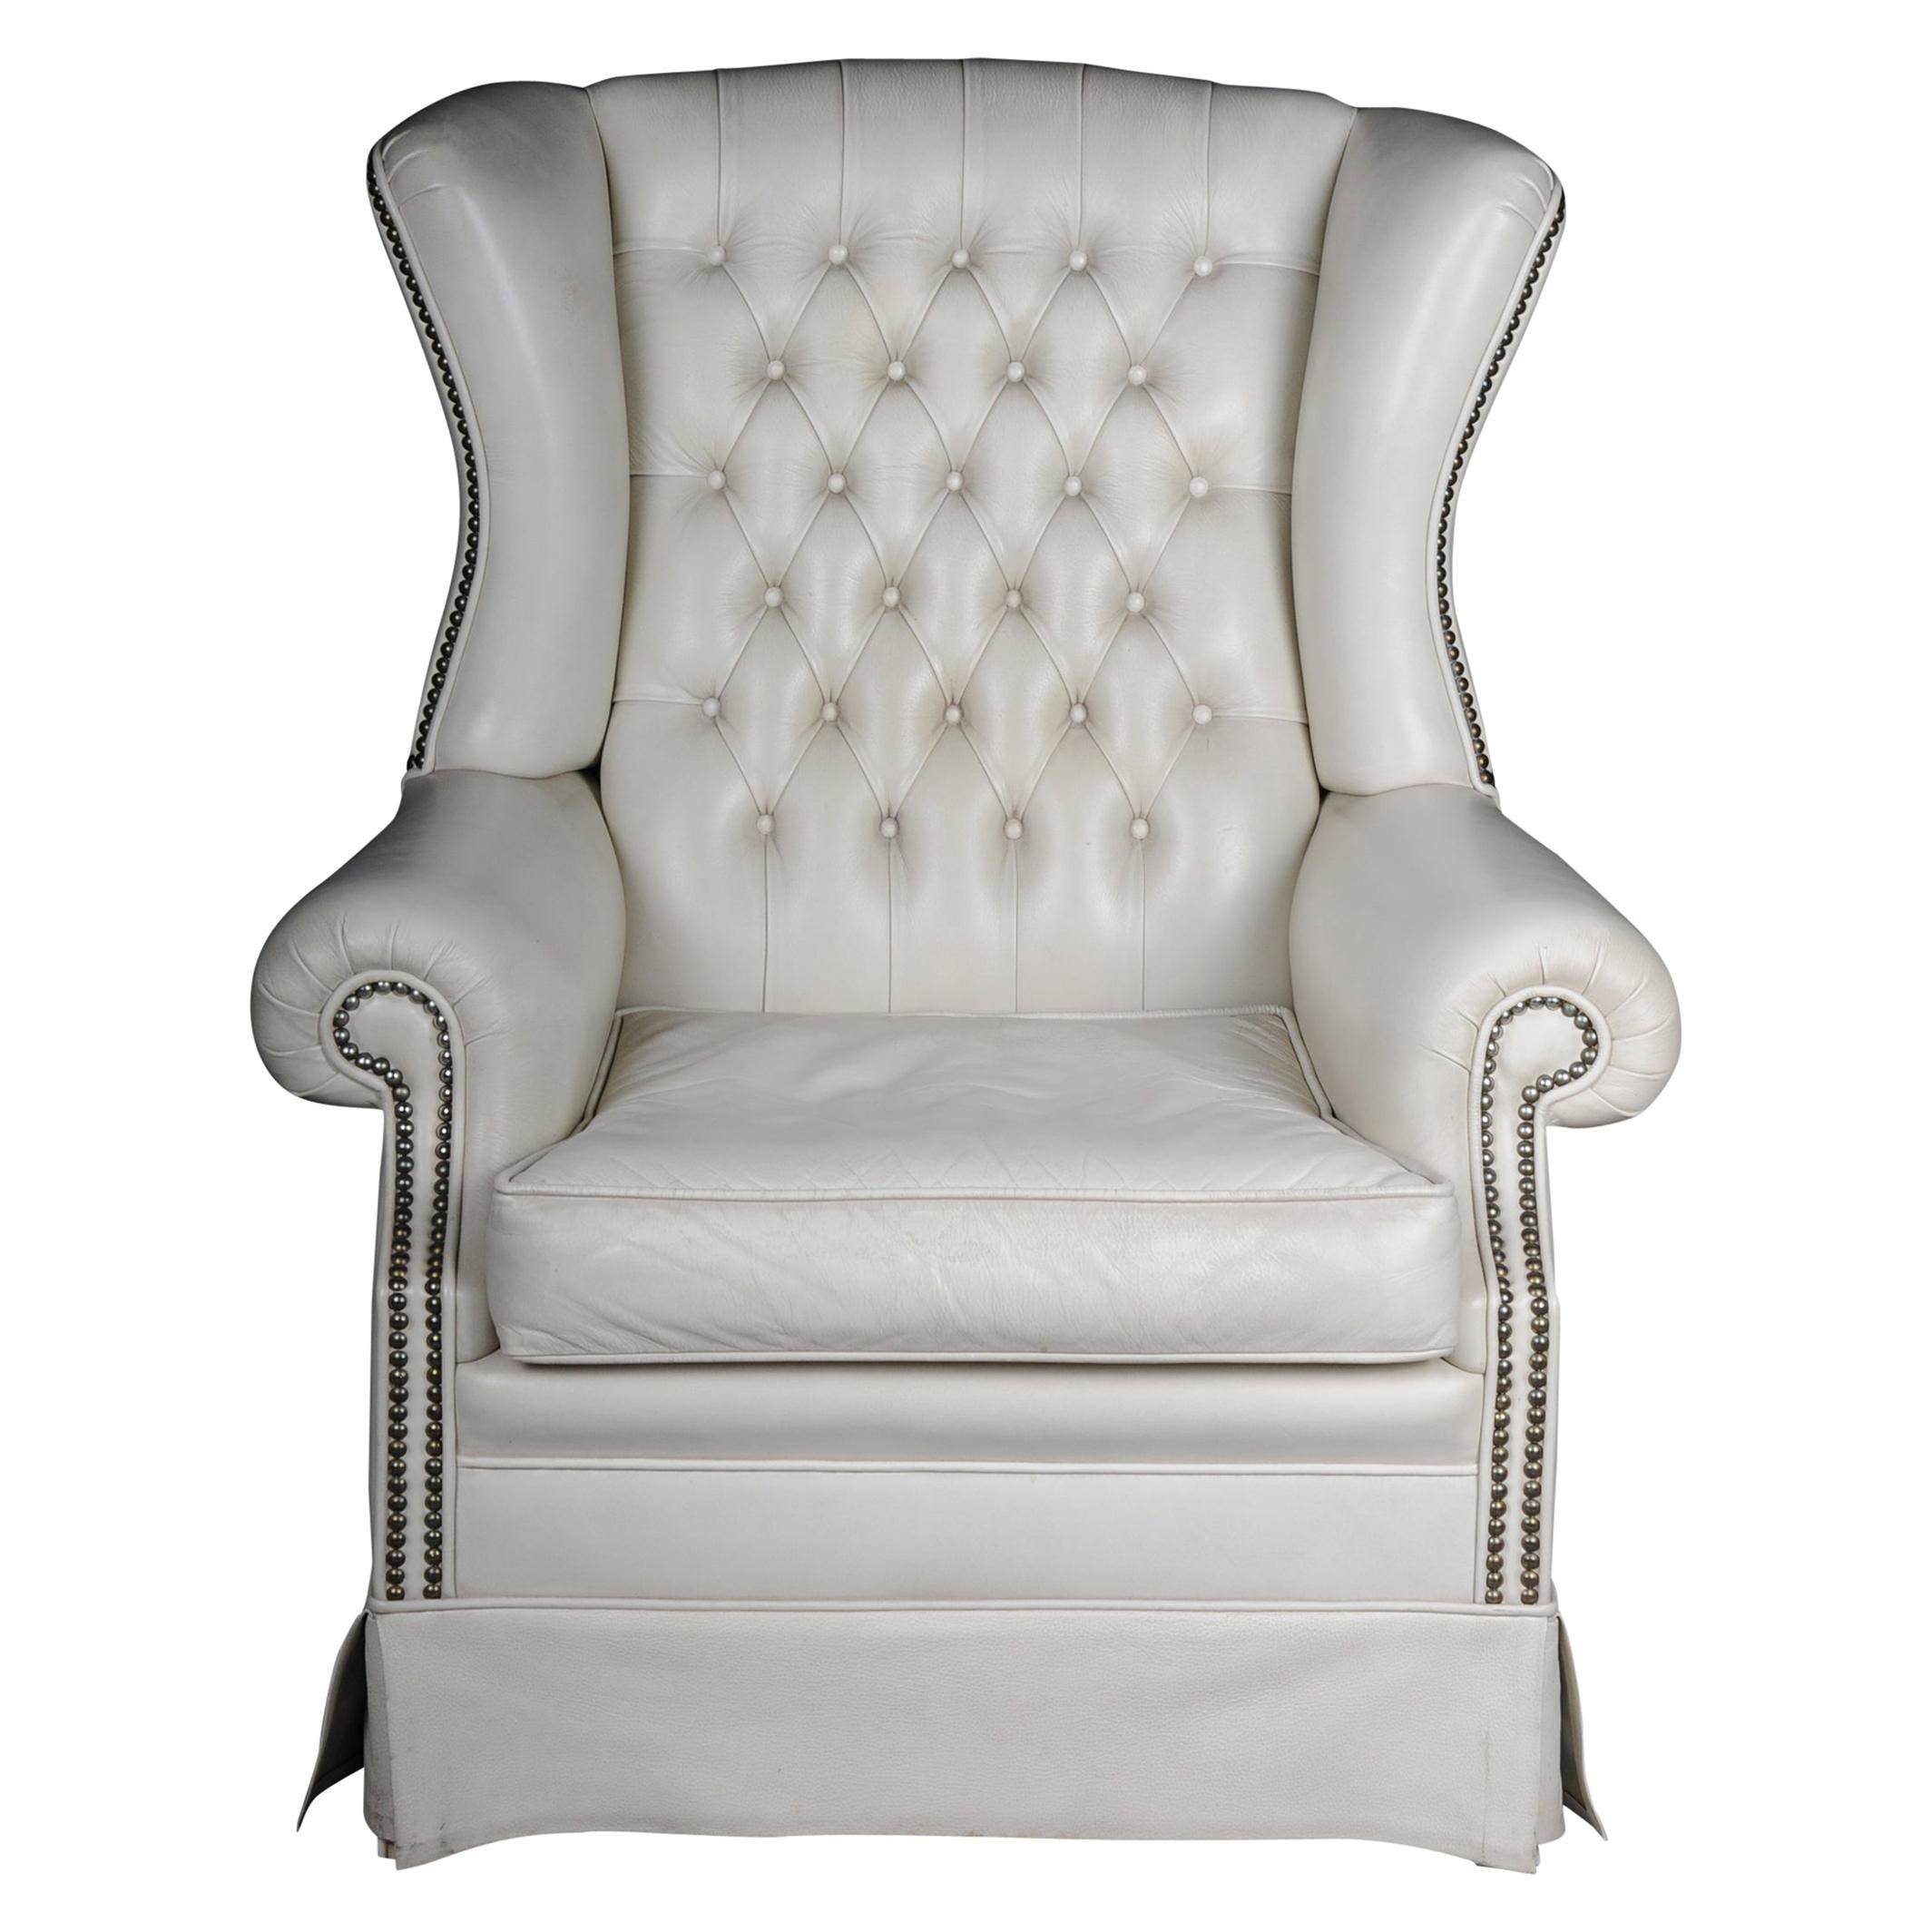 20th Century Beautiful Vintage Chesterfield Armchair / Club Chair, White